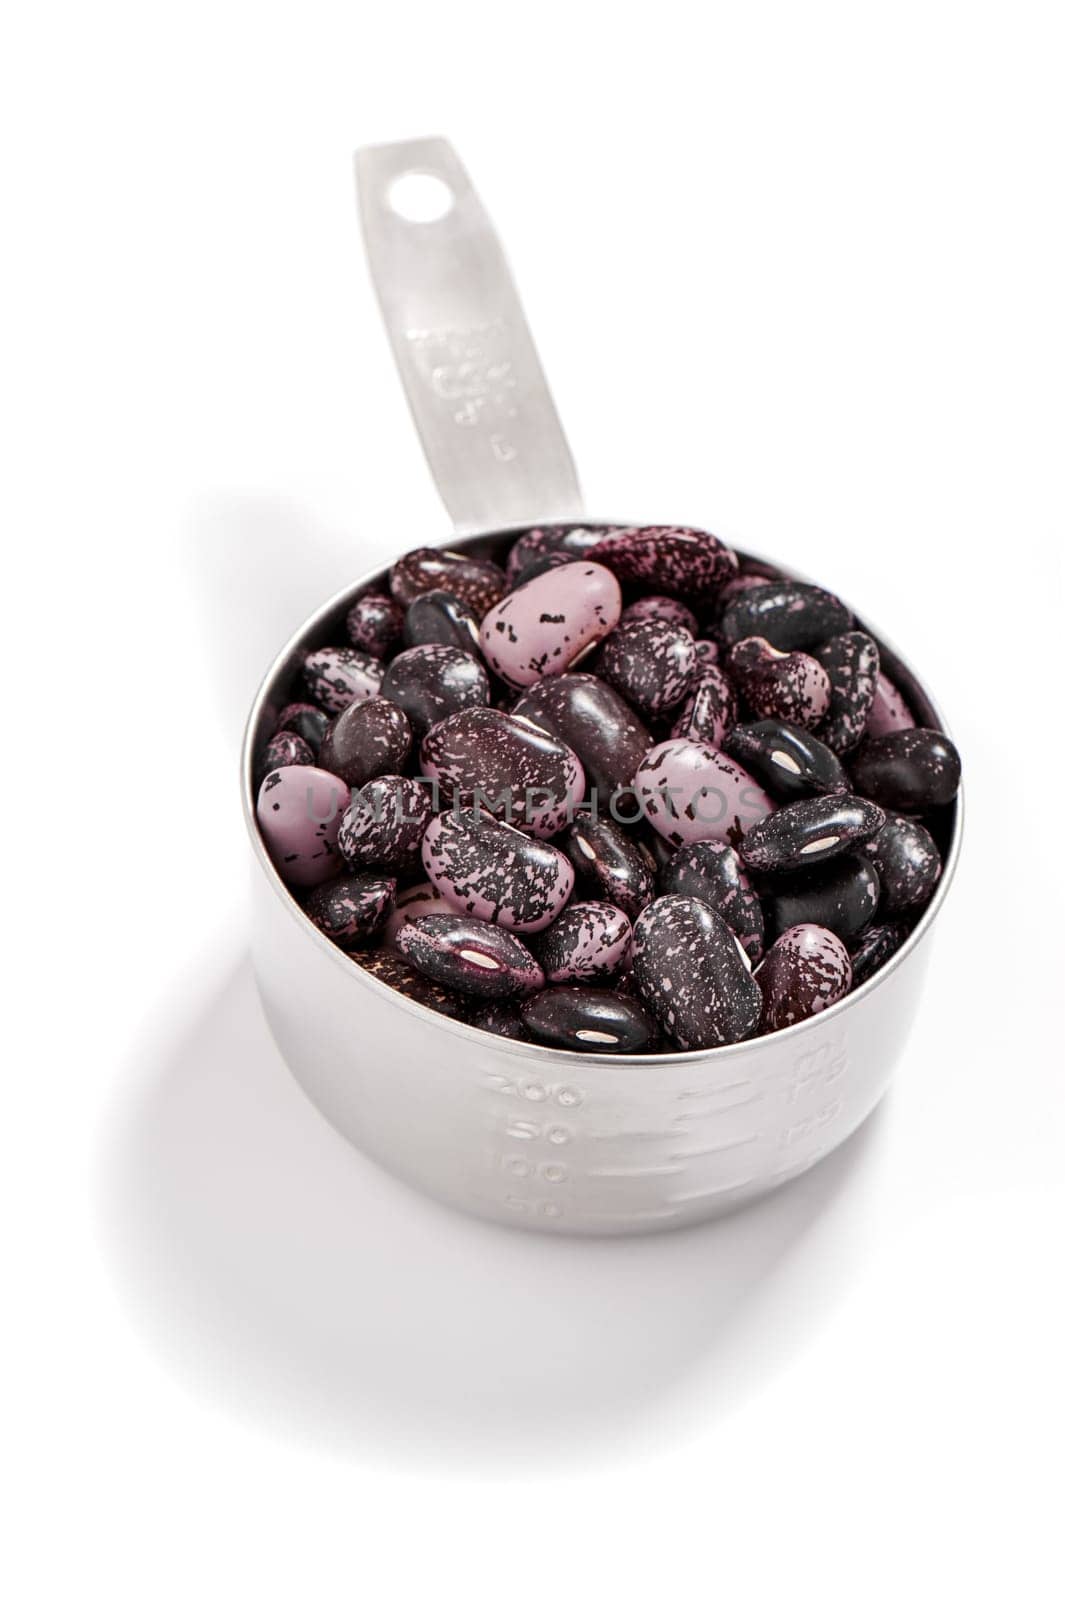 Kidney beans in a measuring cup, white background